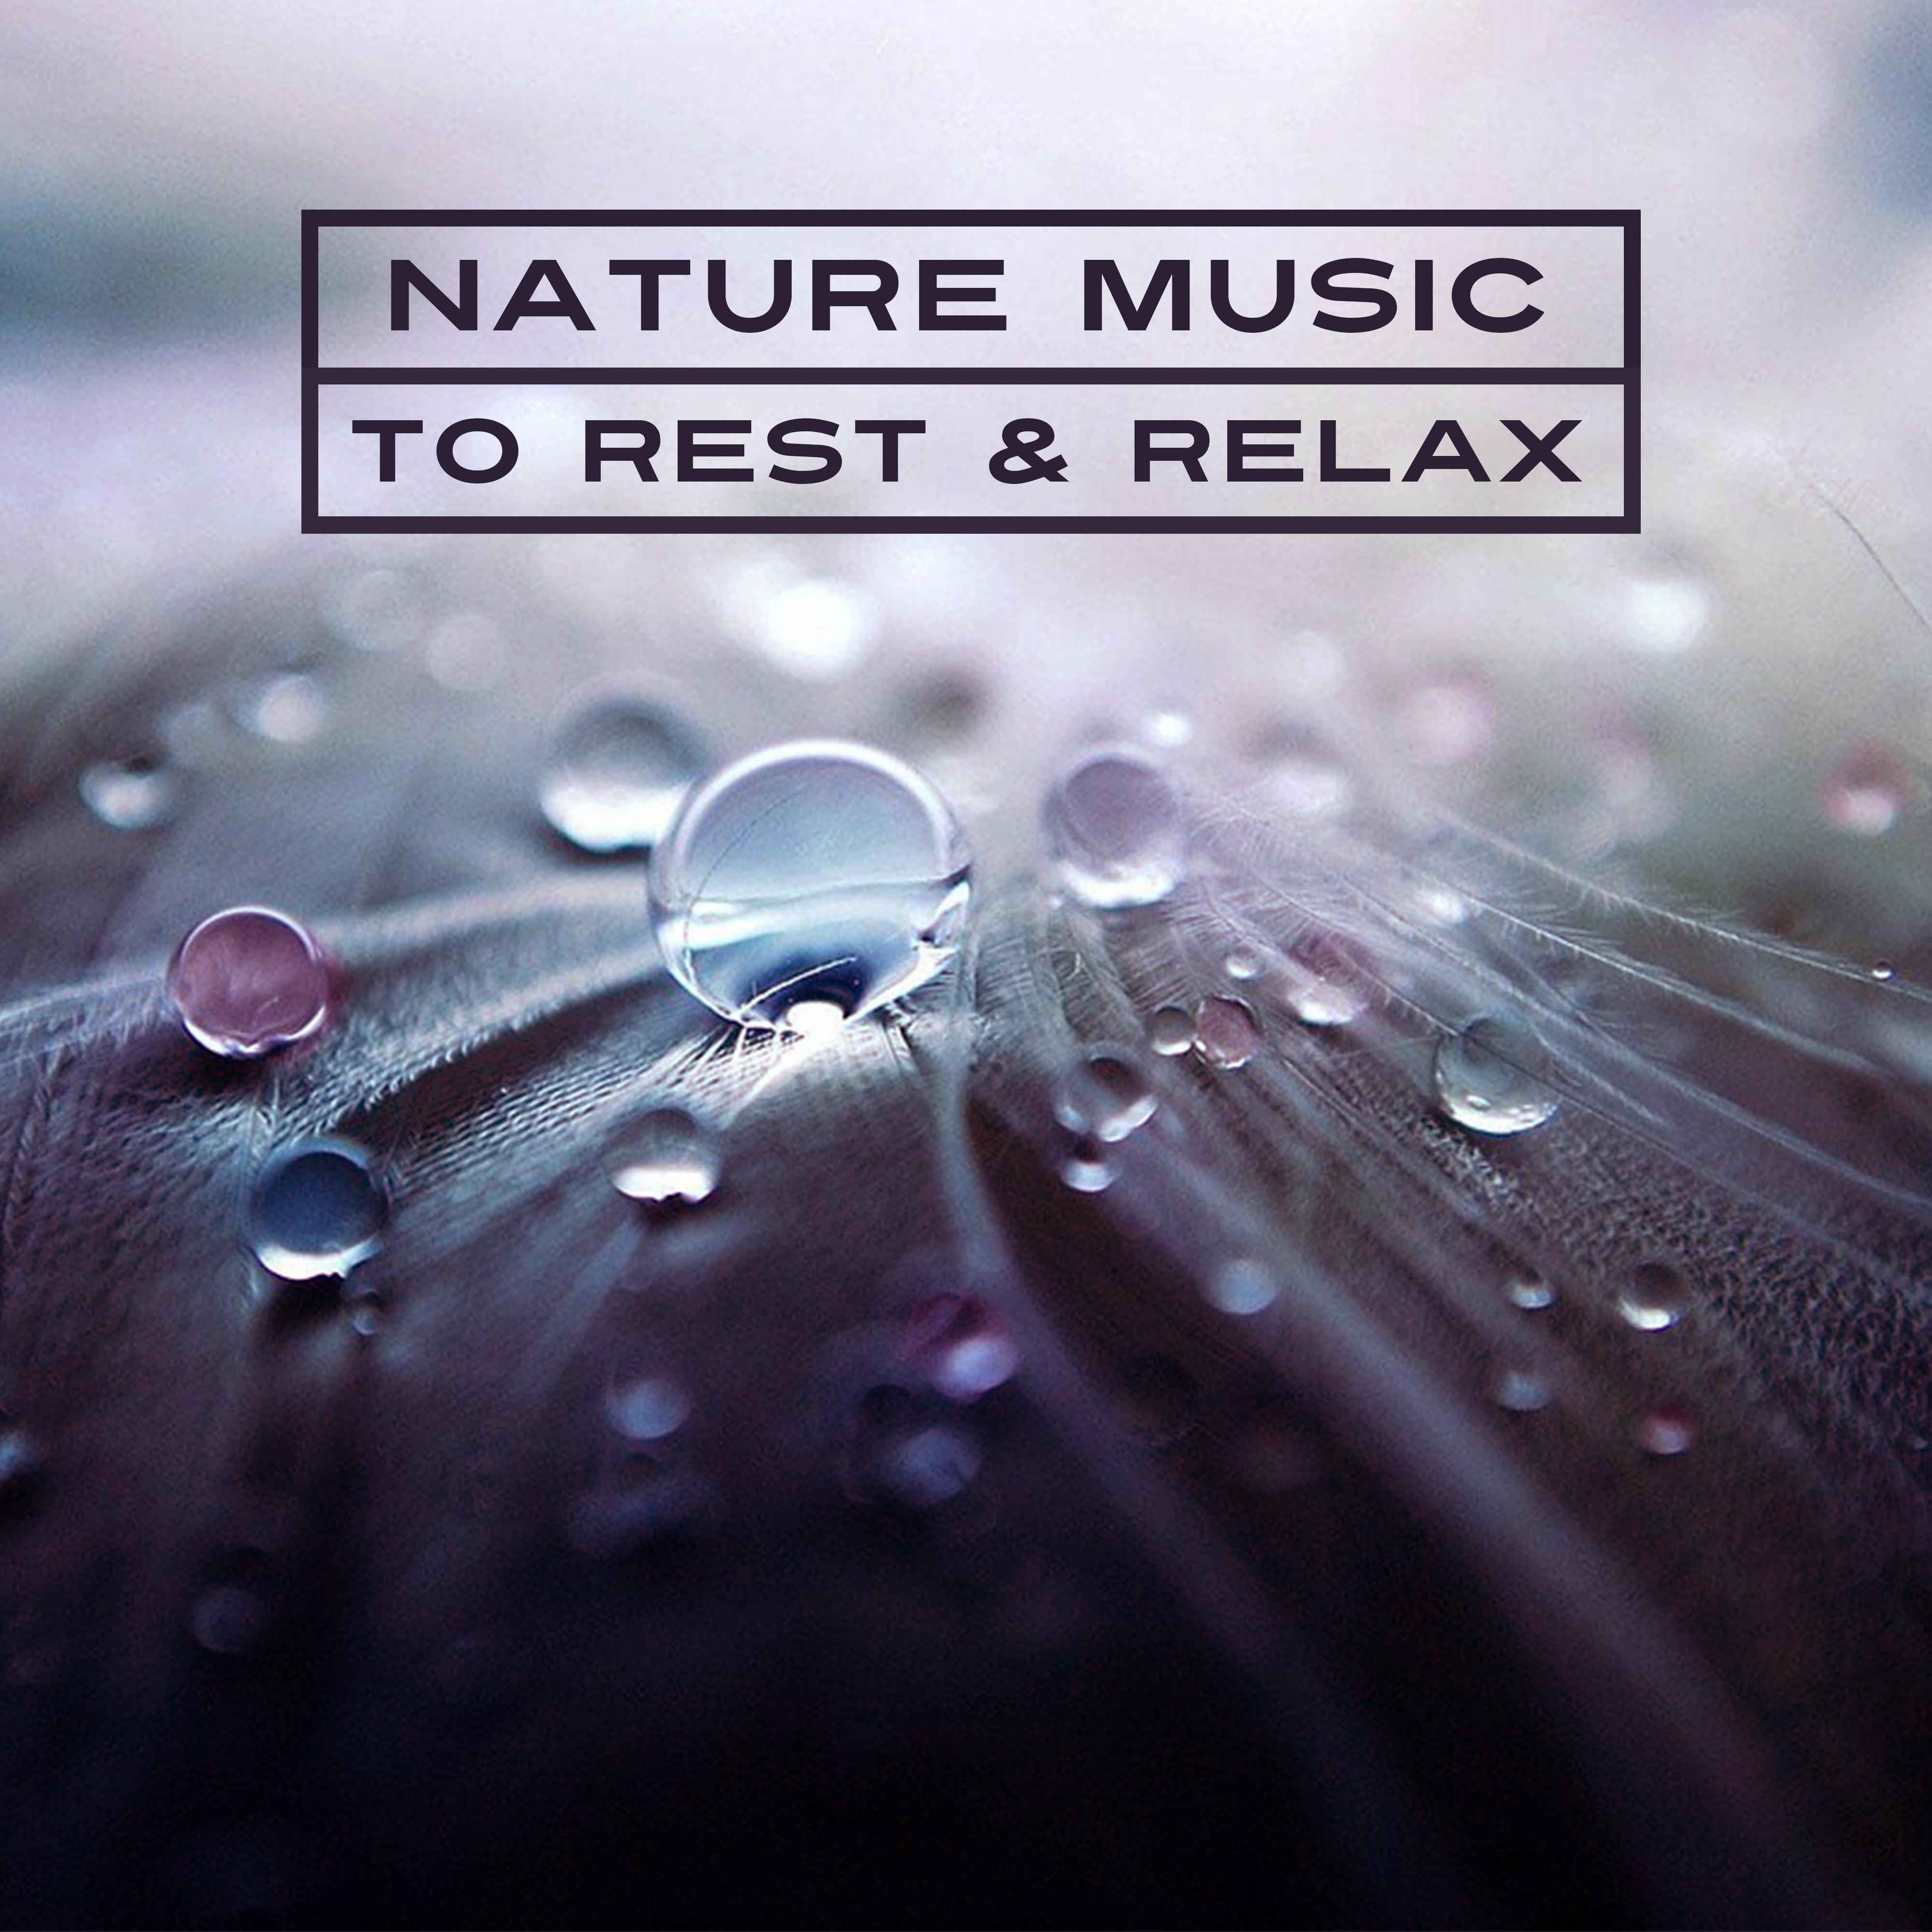 Nature Music to Rest  Relax  New Age Music, Sounds of Nature, Calm Waves, Healing Therapy